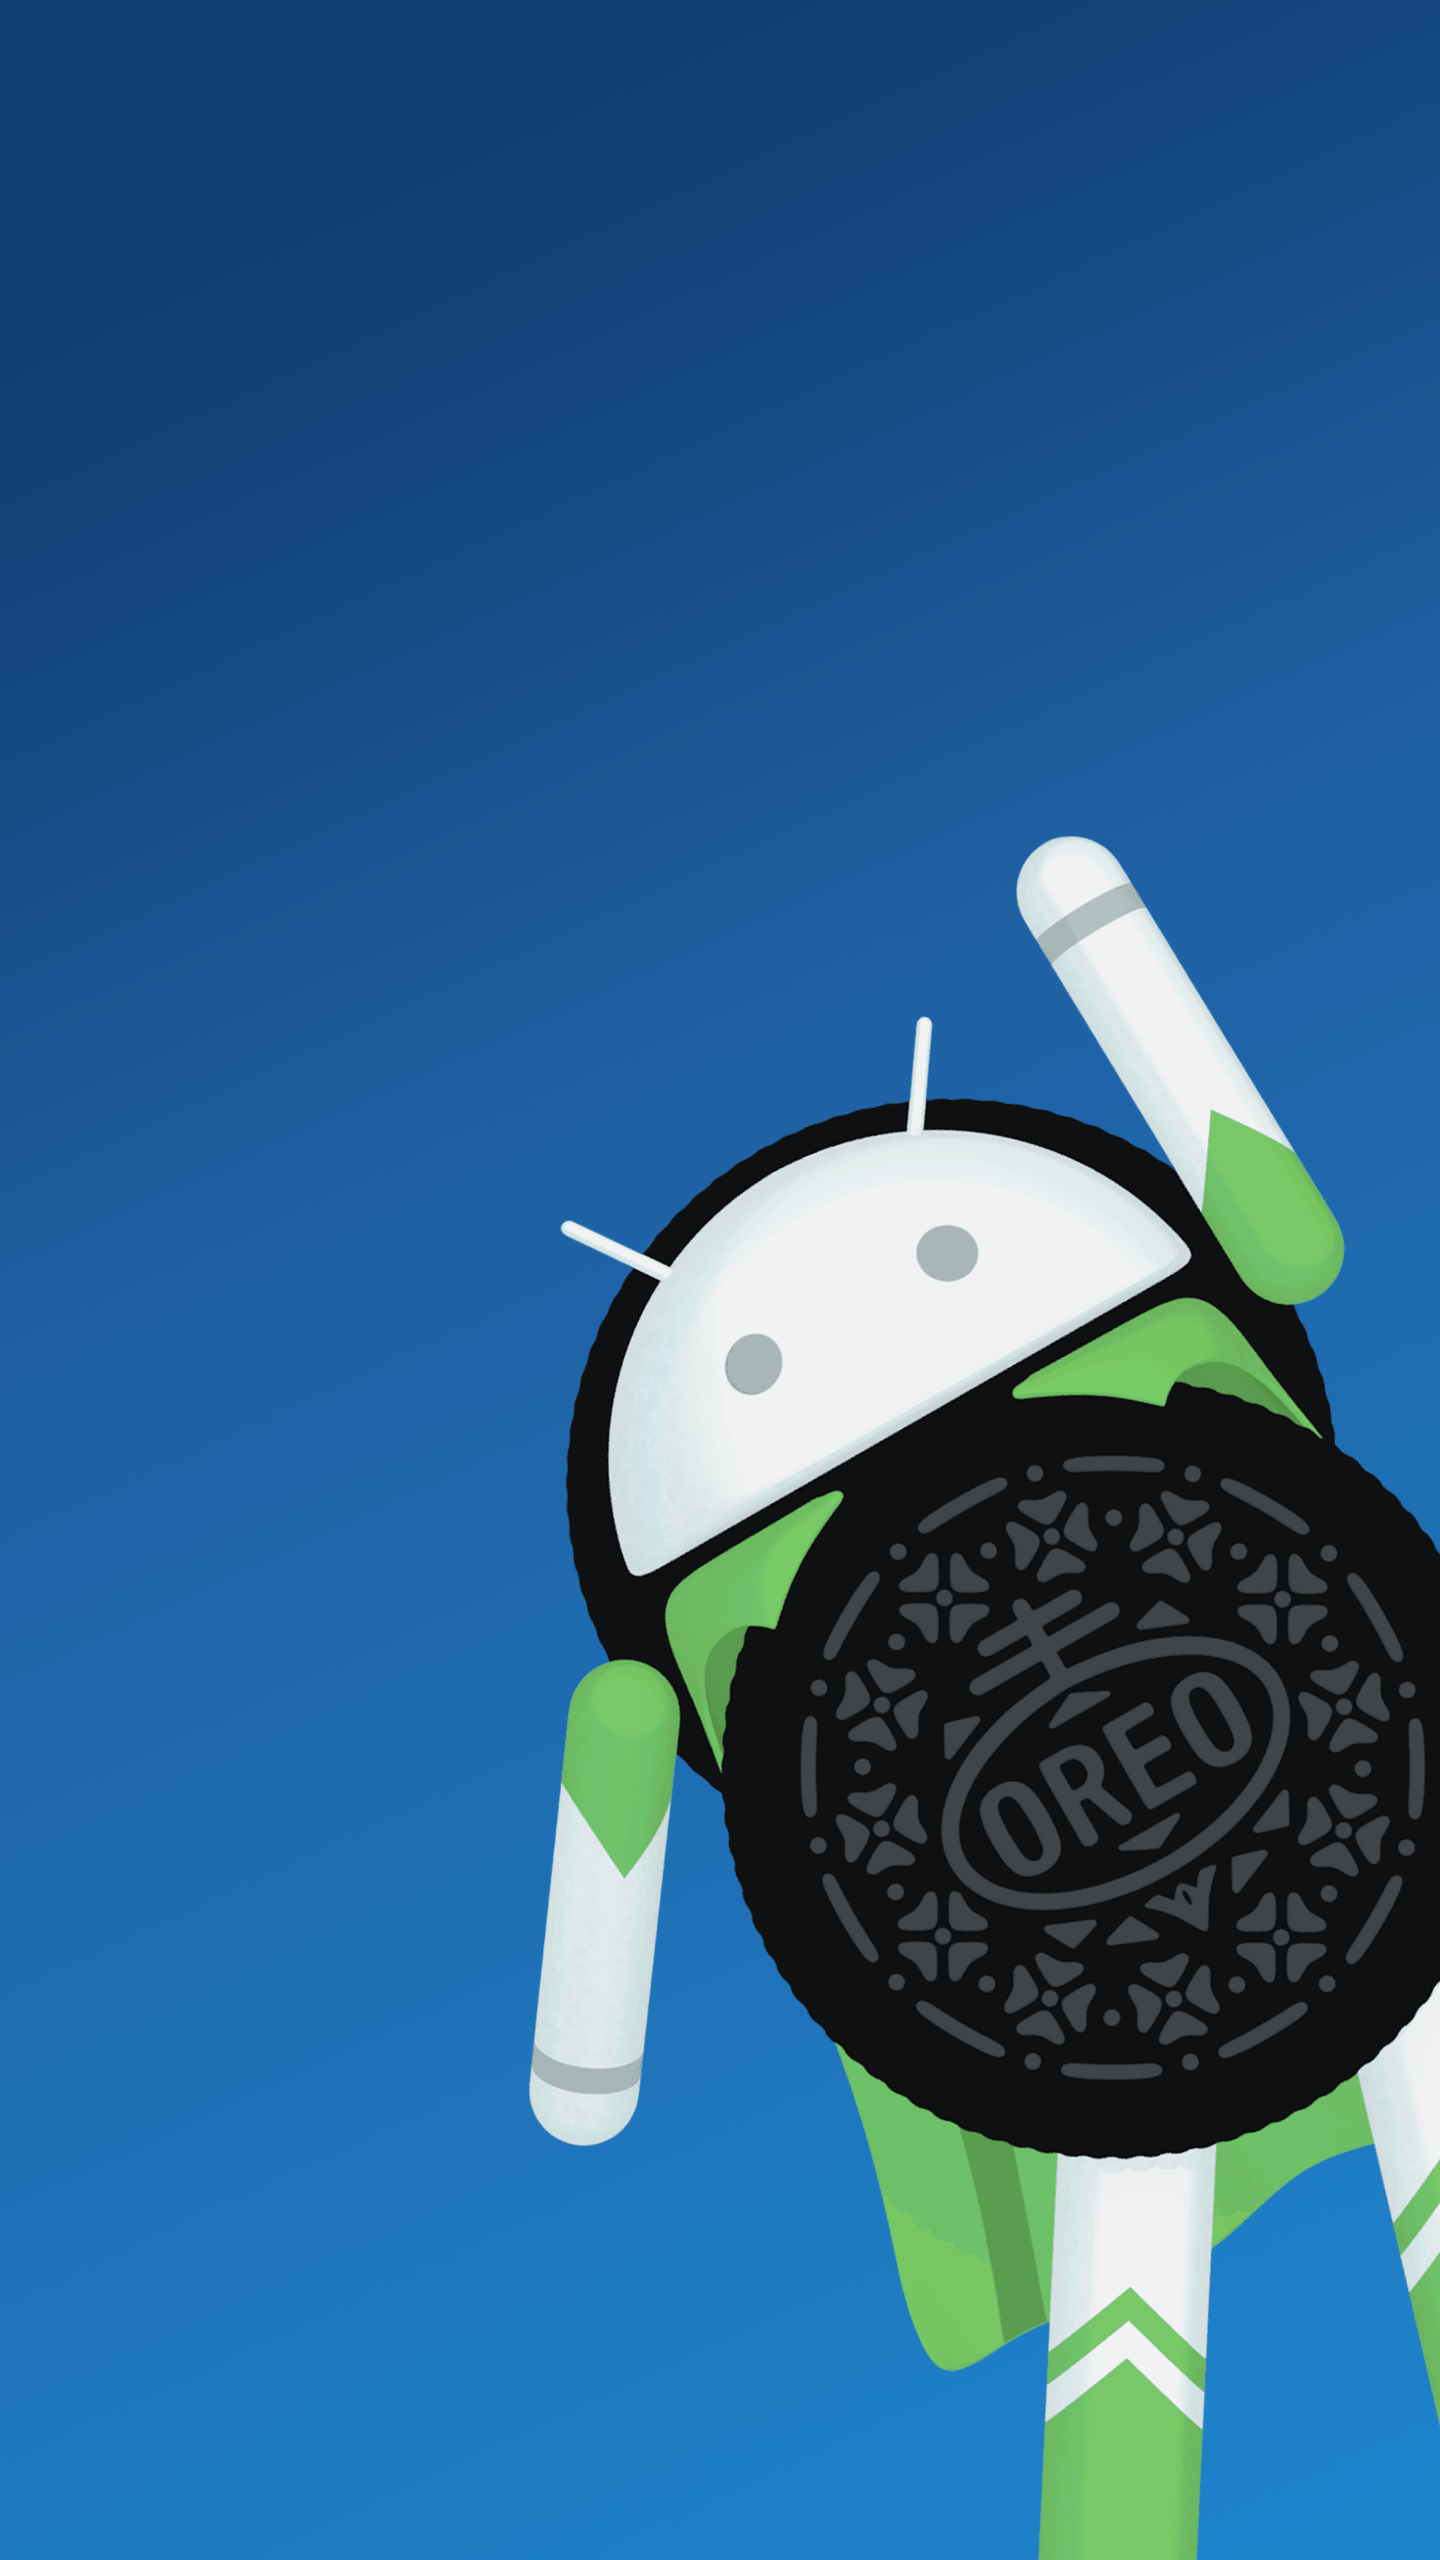 Android Oreo wallpaper for mobiles and tablets - Oreo